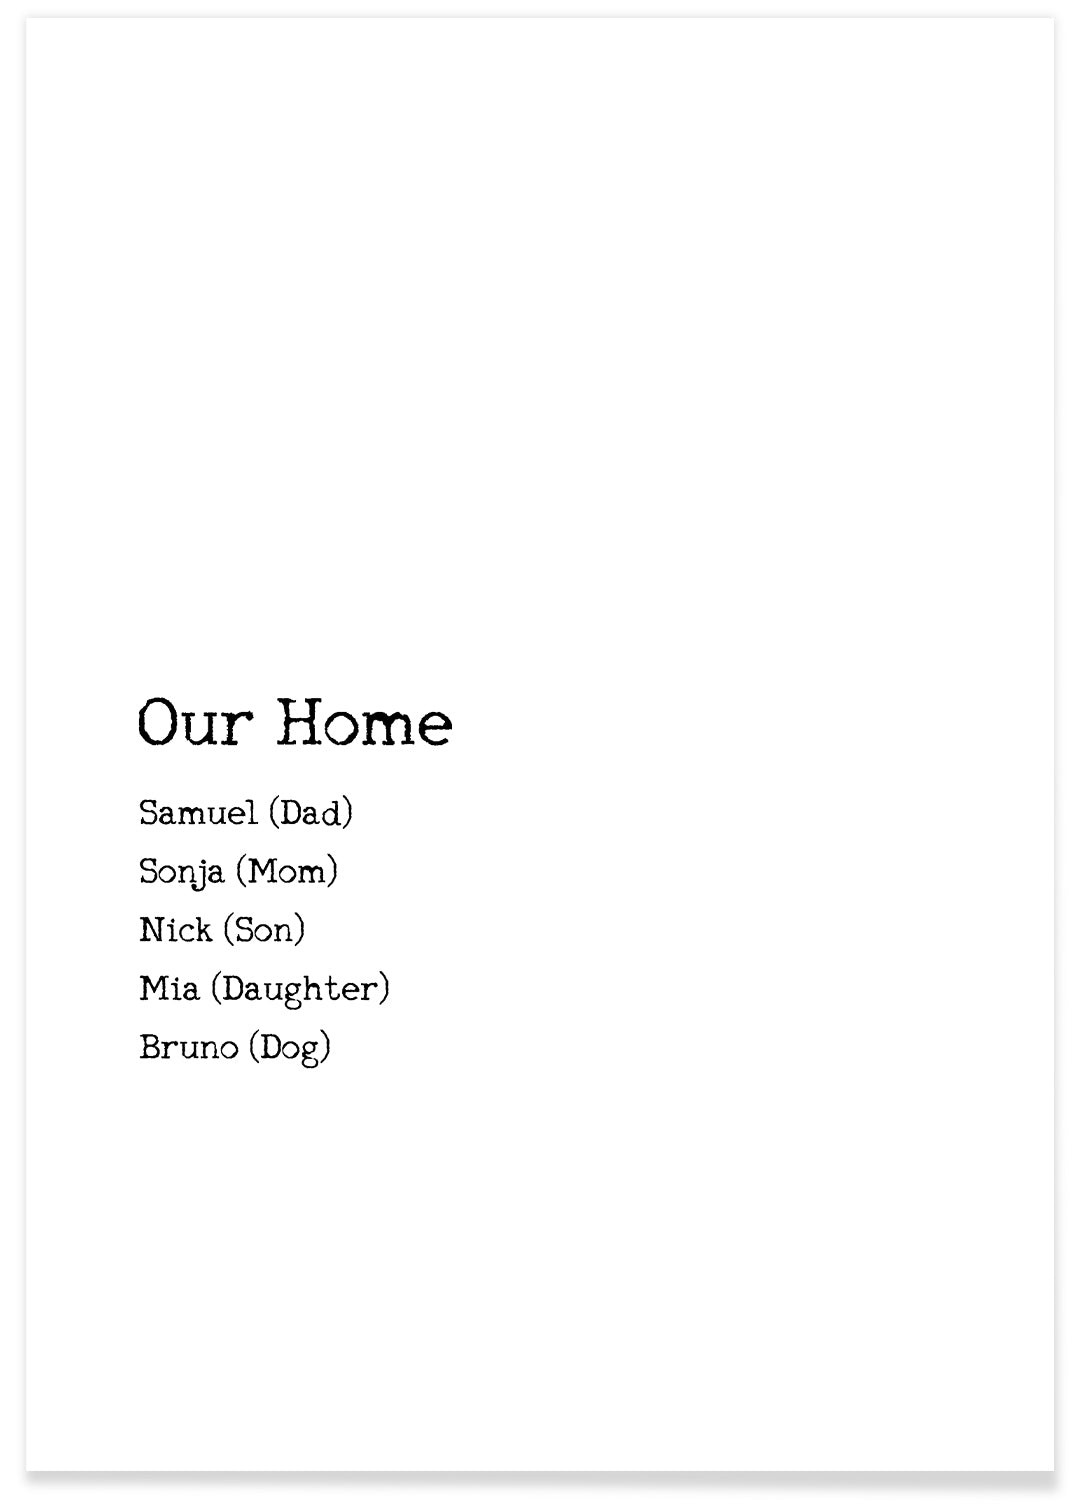 Poster "Our Home"